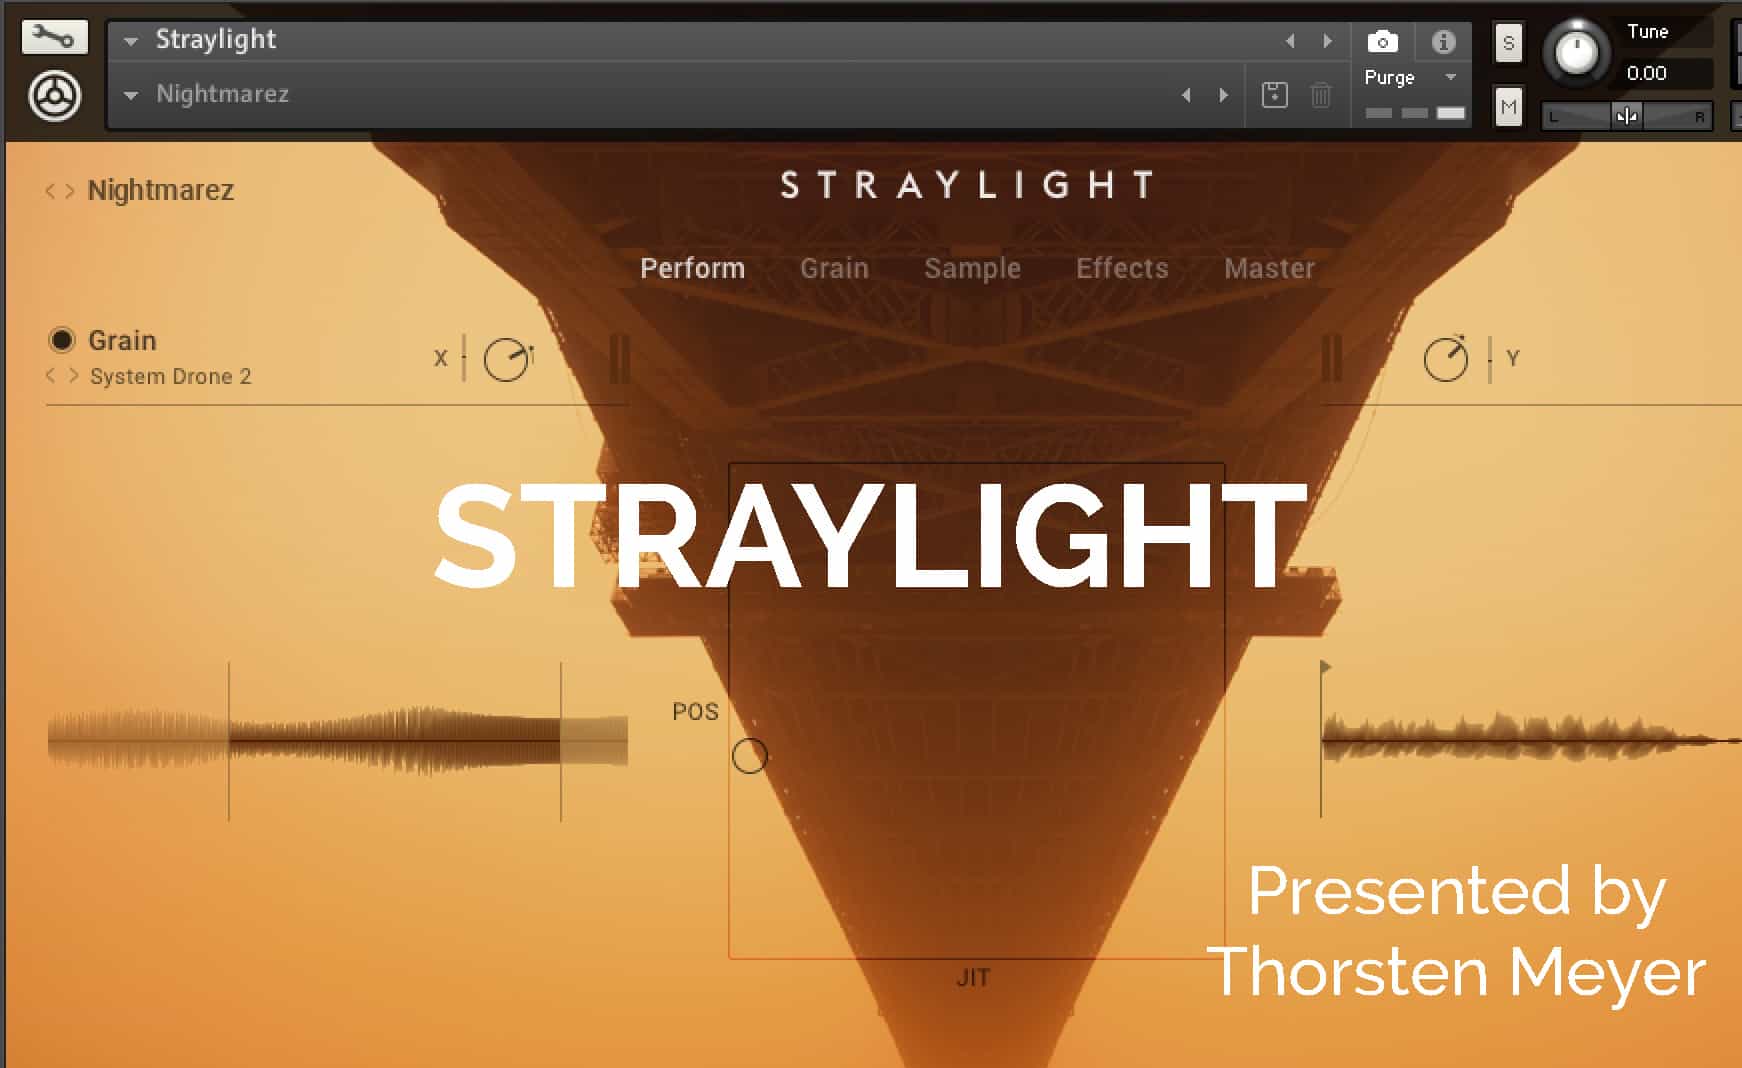 STRAYLIGHT by Native Instruments Cubase and using TouchOSC 1